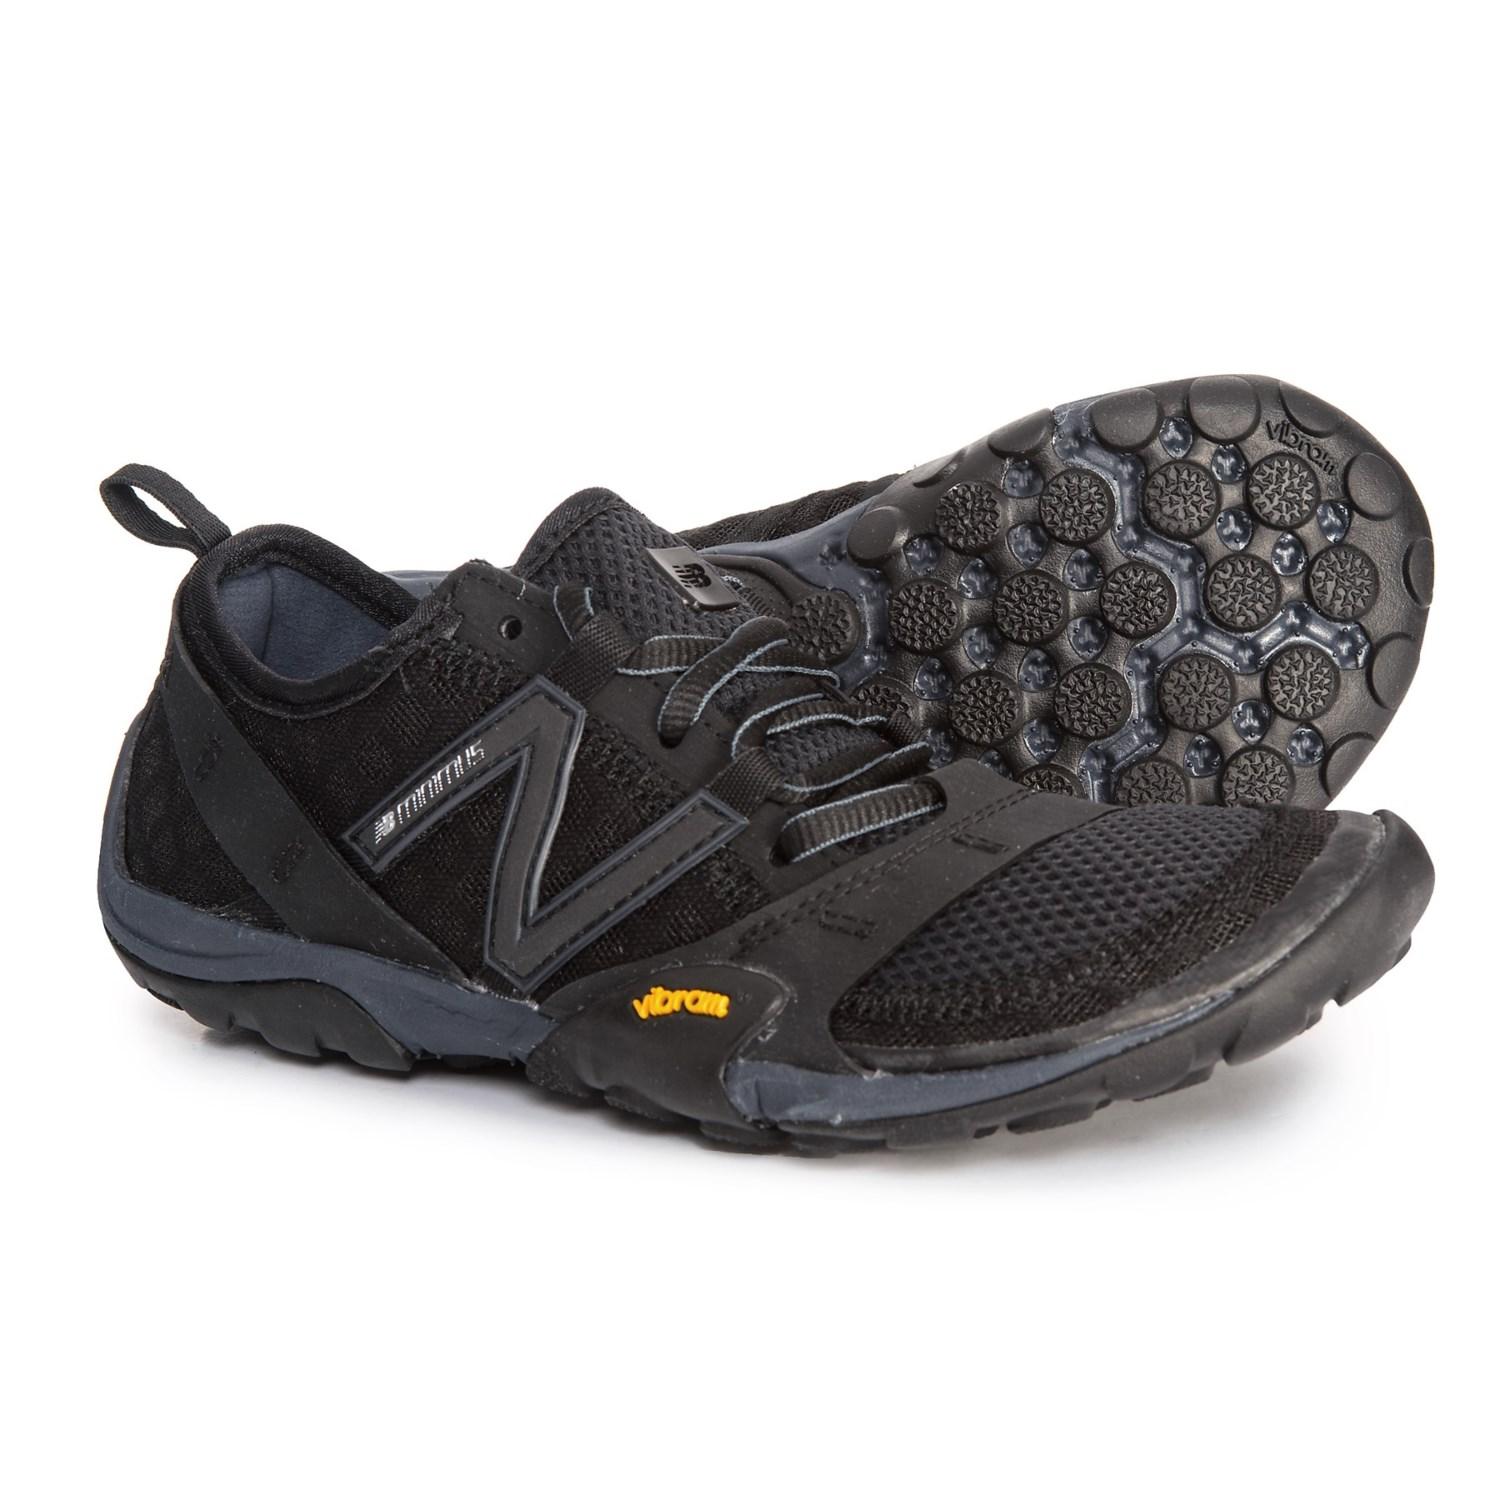 New Balance Synthetic Minimus 10v1 Trail Running Shoes in Black - Lyst